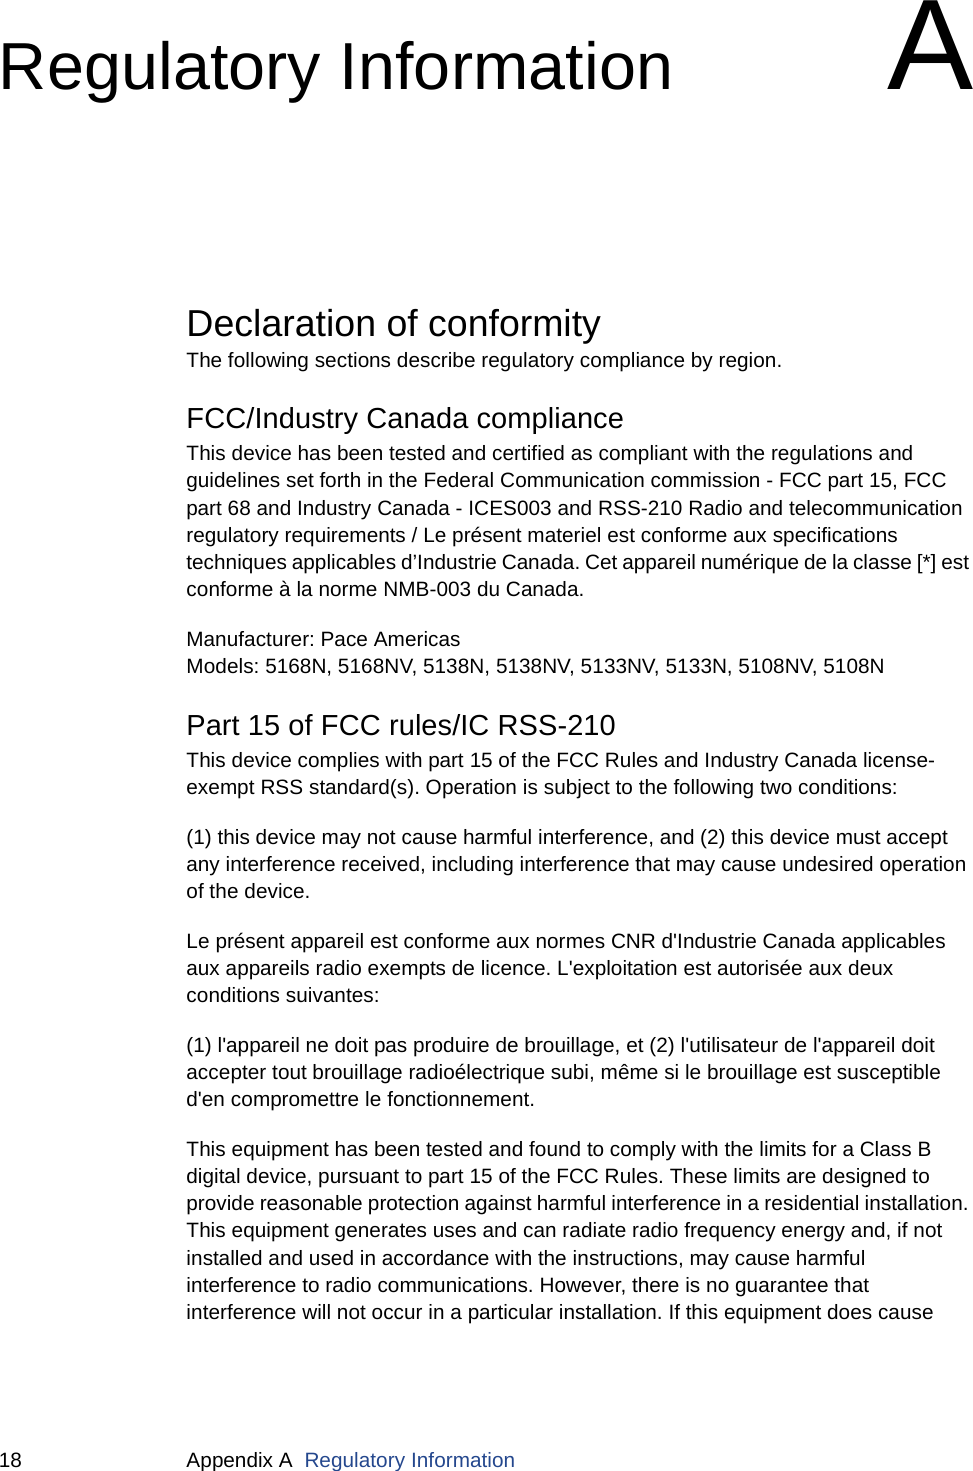 18 Appendix A  Regulatory InformationRegulatory InformationADeclaration of conformityThe following sections describe regulatory compliance by region.FCC/Industry Canada complianceThis device has been tested and certified as compliant with the regulations and guidelines set forth in the Federal Communication commission - FCC part 15, FCC part 68 and Industry Canada - ICES003 and RSS-210 Radio and telecommunication regulatory requirements / Le présent materiel est conforme aux specifications techniques applicables d’Industrie Canada. Cet appareil numérique de la classe [*] est conforme à la norme NMB-003 du Canada.Manufacturer: Pace AmericasModels: 5168N, 5168NV, 5138N, 5138NV, 5133NV, 5133N, 5108NV, 5108NPart 15 of FCC rules/IC RSS-210This device complies with part 15 of the FCC Rules and Industry Canada license-exempt RSS standard(s). Operation is subject to the following two conditions: (1) this device may not cause harmful interference, and (2) this device must accept any interference received, including interference that may cause undesired operation of the device.Le présent appareil est conforme aux normes CNR d&apos;Industrie Canada applicables aux appareils radio exempts de licence. L&apos;exploitation est autorisée aux deux conditions suivantes:(1) l&apos;appareil ne doit pas produire de brouillage, et (2) l&apos;utilisateur de l&apos;appareil doit accepter tout brouillage radioélectrique subi, même si le brouillage est susceptible d&apos;en compromettre le fonctionnement.This equipment has been tested and found to comply with the limits for a Class B digital device, pursuant to part 15 of the FCC Rules. These limits are designed to provide reasonable protection against harmful interference in a residential installation. This equipment generates uses and can radiate radio frequency energy and, if not installed and used in accordance with the instructions, may cause harmful interference to radio communications. However, there is no guarantee that interference will not occur in a particular installation. If this equipment does cause 